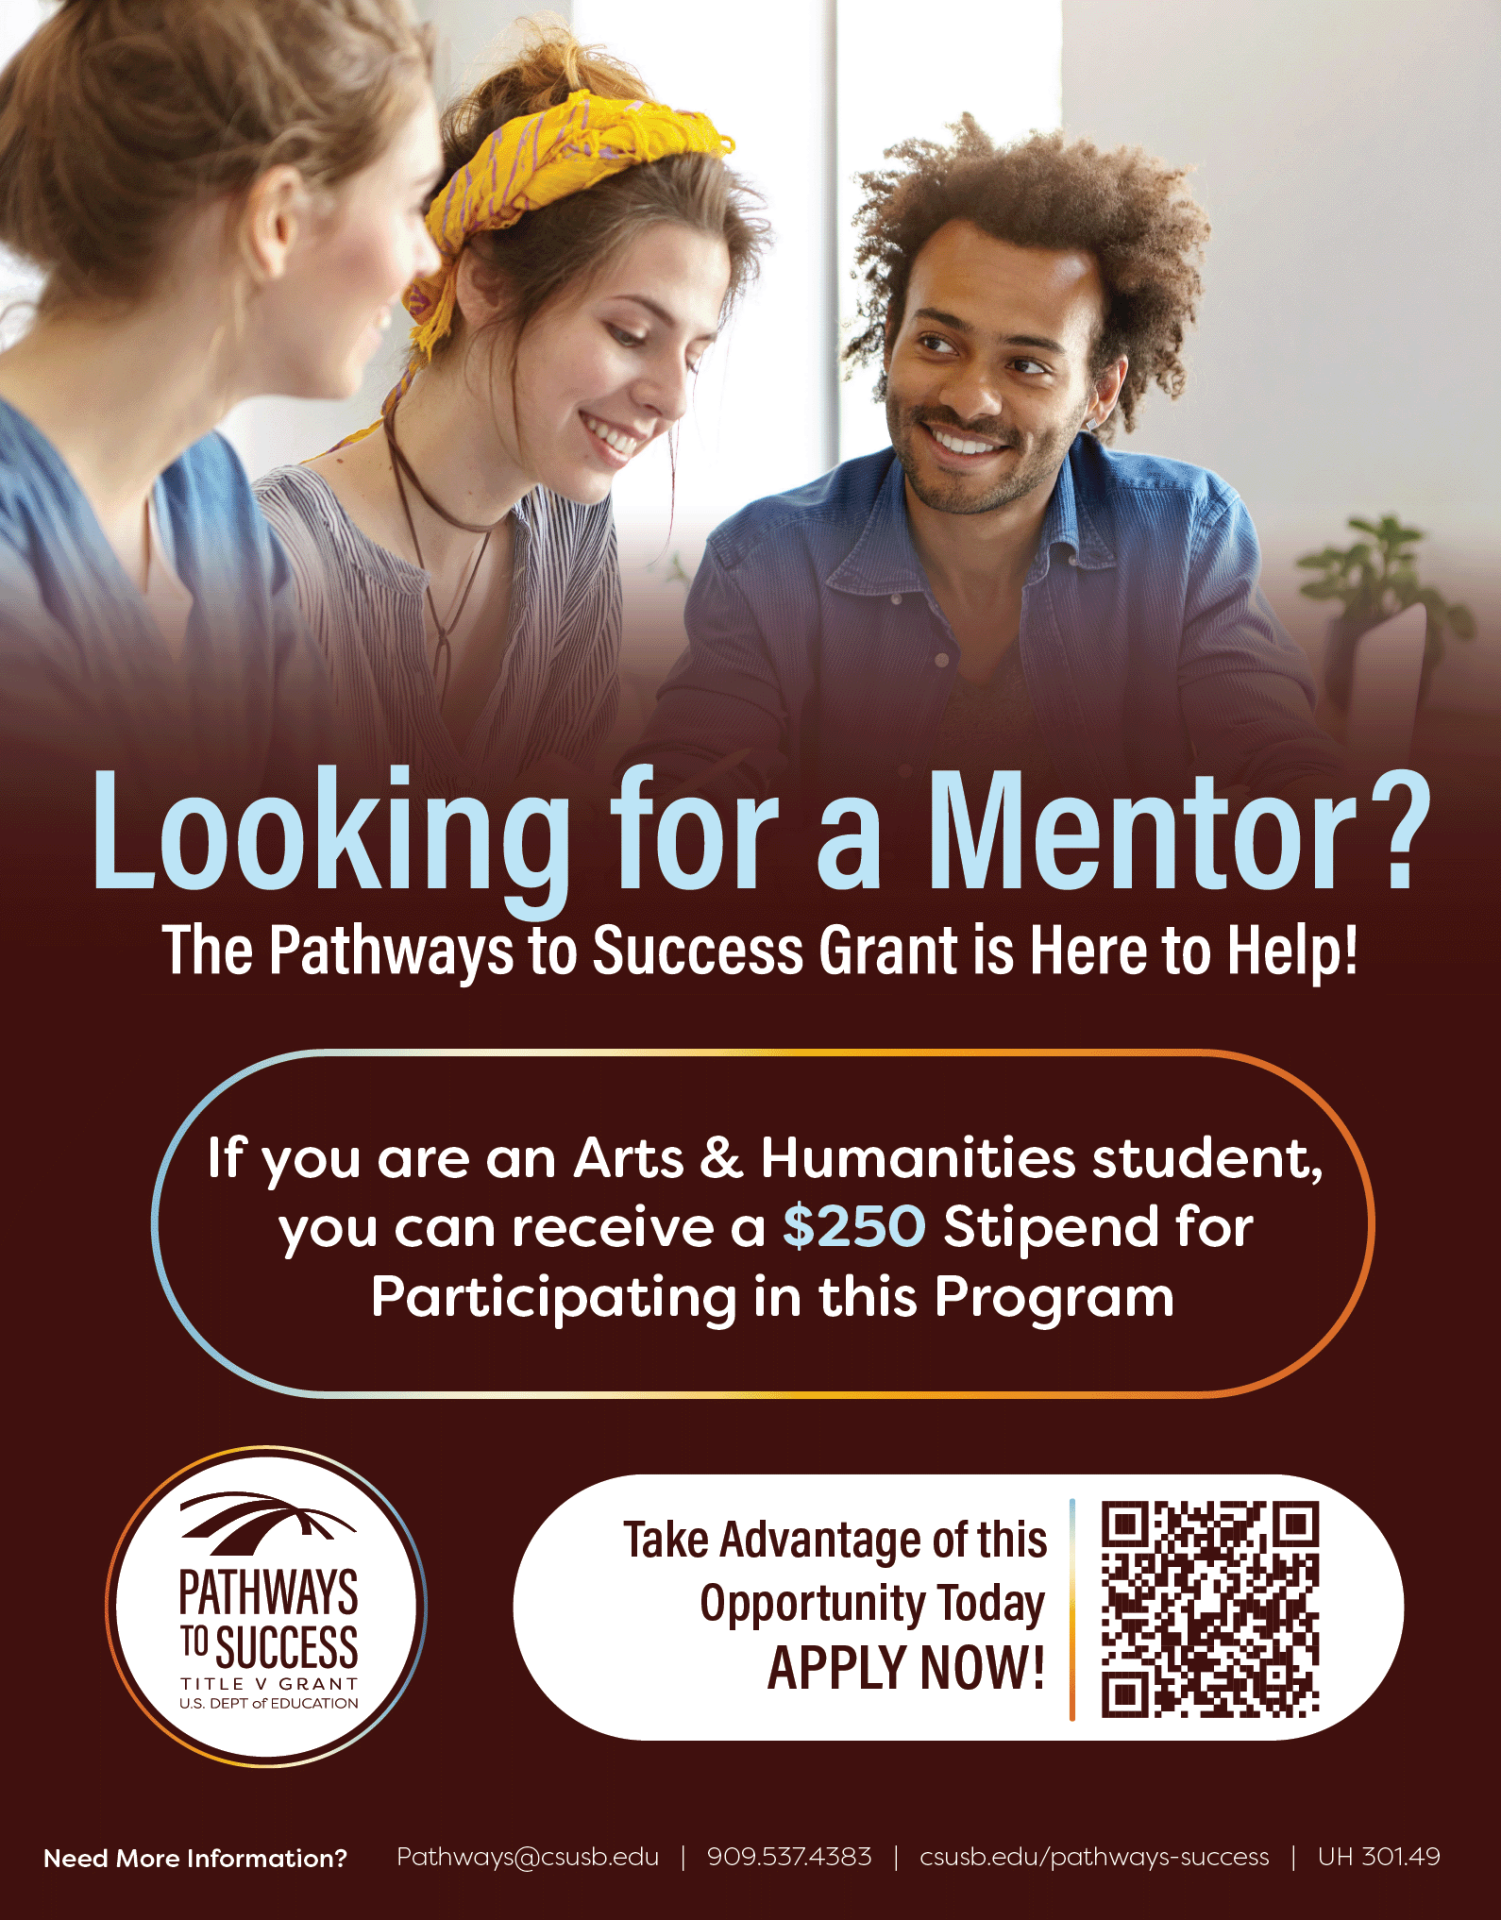 The image is of a poster for the peer mentoring program. A picture of three people is at the top and it slowly turns into a dark red gradient towards the bottom. The text reads "Looking for a Mentor? The Pathways to Success Grant is here to help! If you are an arts and Humanities student, you can receive a @250 stipend for participating in this program. The pathways logo is in the side and there is a qr code that states, "Take advantage of this opportunity today APPLY NOW!"